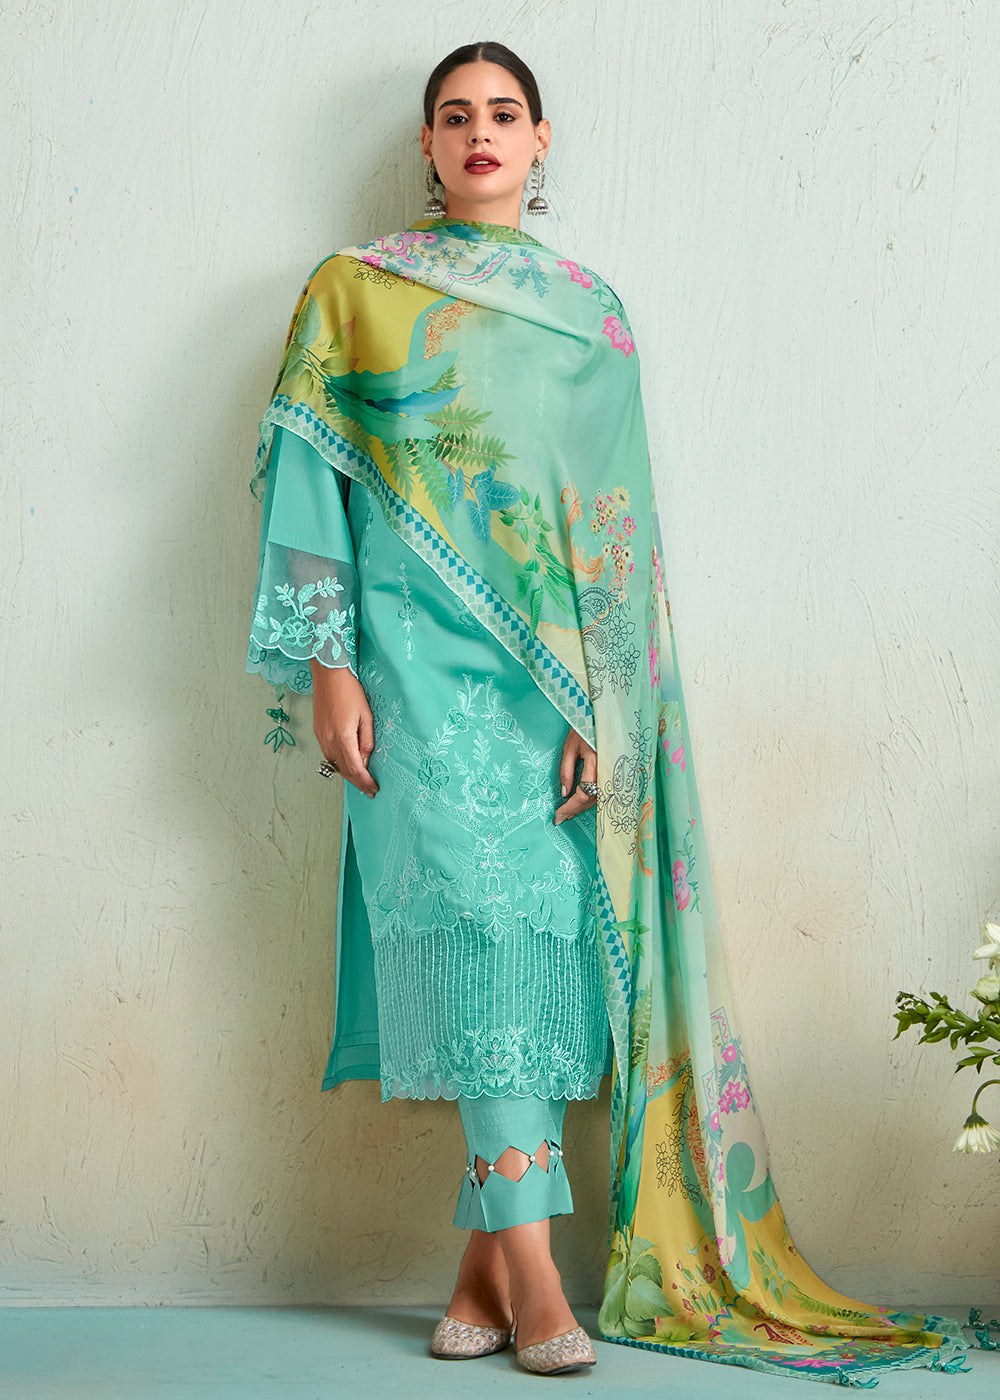 Buy Now Turquoise Blue Pure Muslin Resham Embroidered Salwar Suit Online in USA, UK, Canada, Germany, Australia & Worldwide at Empress Clothing.